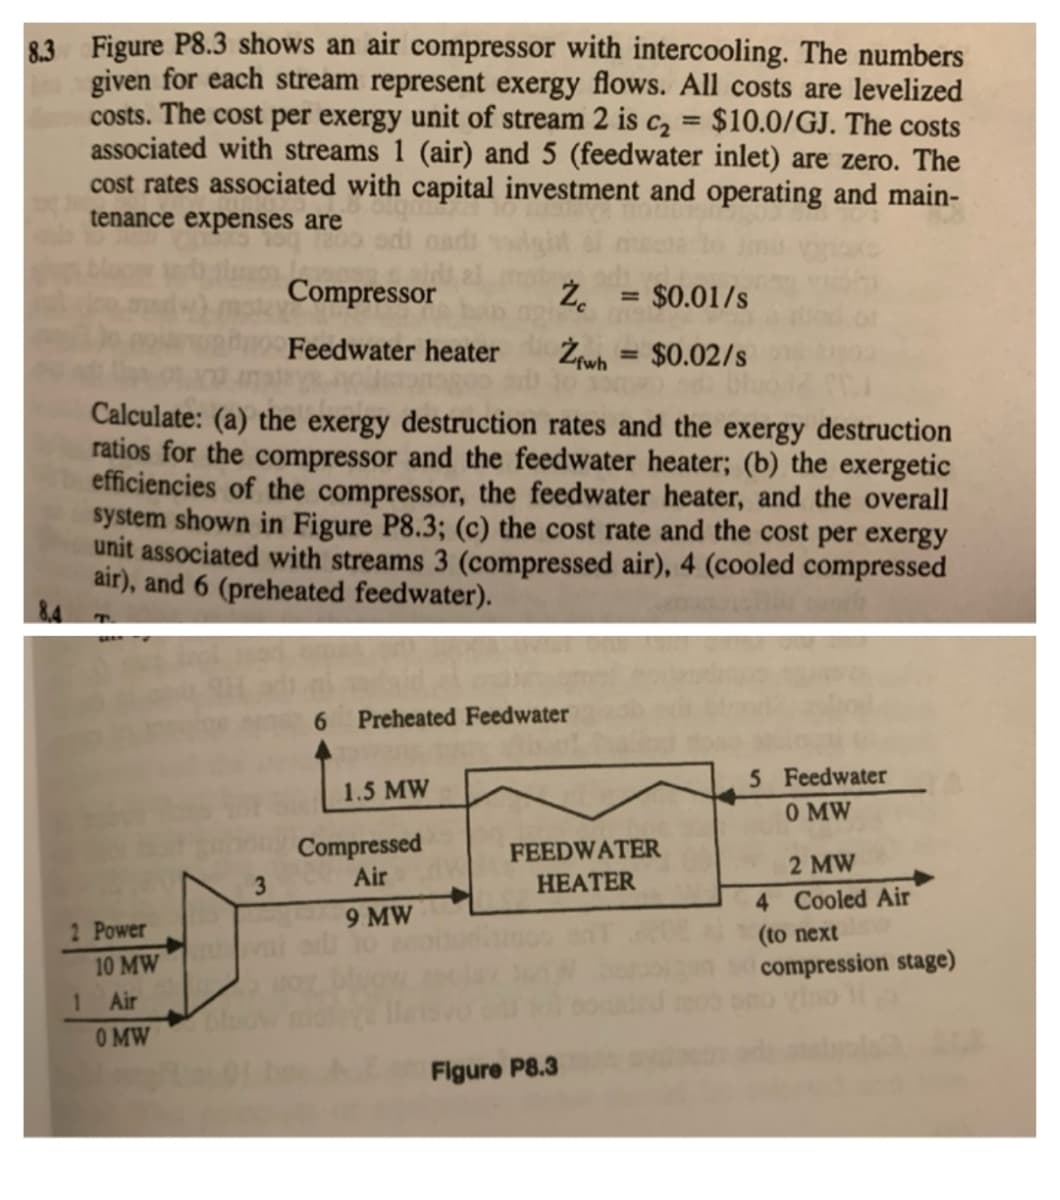 8.3 Figure P8.3 shows an air compressor with intercooling. The numbers
given for each stream represent exergy flows. All costs are levelized
costs. The cost per exergy unit of stream 2 is c2 = $10.0/GJ. The costs
associated with streams 1 (air) and 5 (feedwater inlet) are zero. The
cost rates associated with capital investment and operating and main-
%3D
tenance expenses are
Compressor
$0.01/s
%3D
Feedwater heater
Żrwh = $0.02/s
%3D
Calculate: (a) the exergy destruction rates and the exergy destruction
ratios for the compressor and the feedwater heater; (b) the exergetic
efficiencies of the compressor, the feedwater heater, and the overall
system shown in Figure P8.3; (c) the cost rate and the cost per exergy
unit associated with streams 3 (compressed air), 4 (cooled compressed
air), and 6 (preheated feedwater).
6.
Preheated Feedwater
5 Feedwater
O MW
1.5 MW
Compressed
Air
FEEDWATER
НЕАTER
2 MW
3
4 Cooled Air
9 MW
2 Power
(to next
10 MW
compression stage)
1
Air
O MW
Figure P8.3
